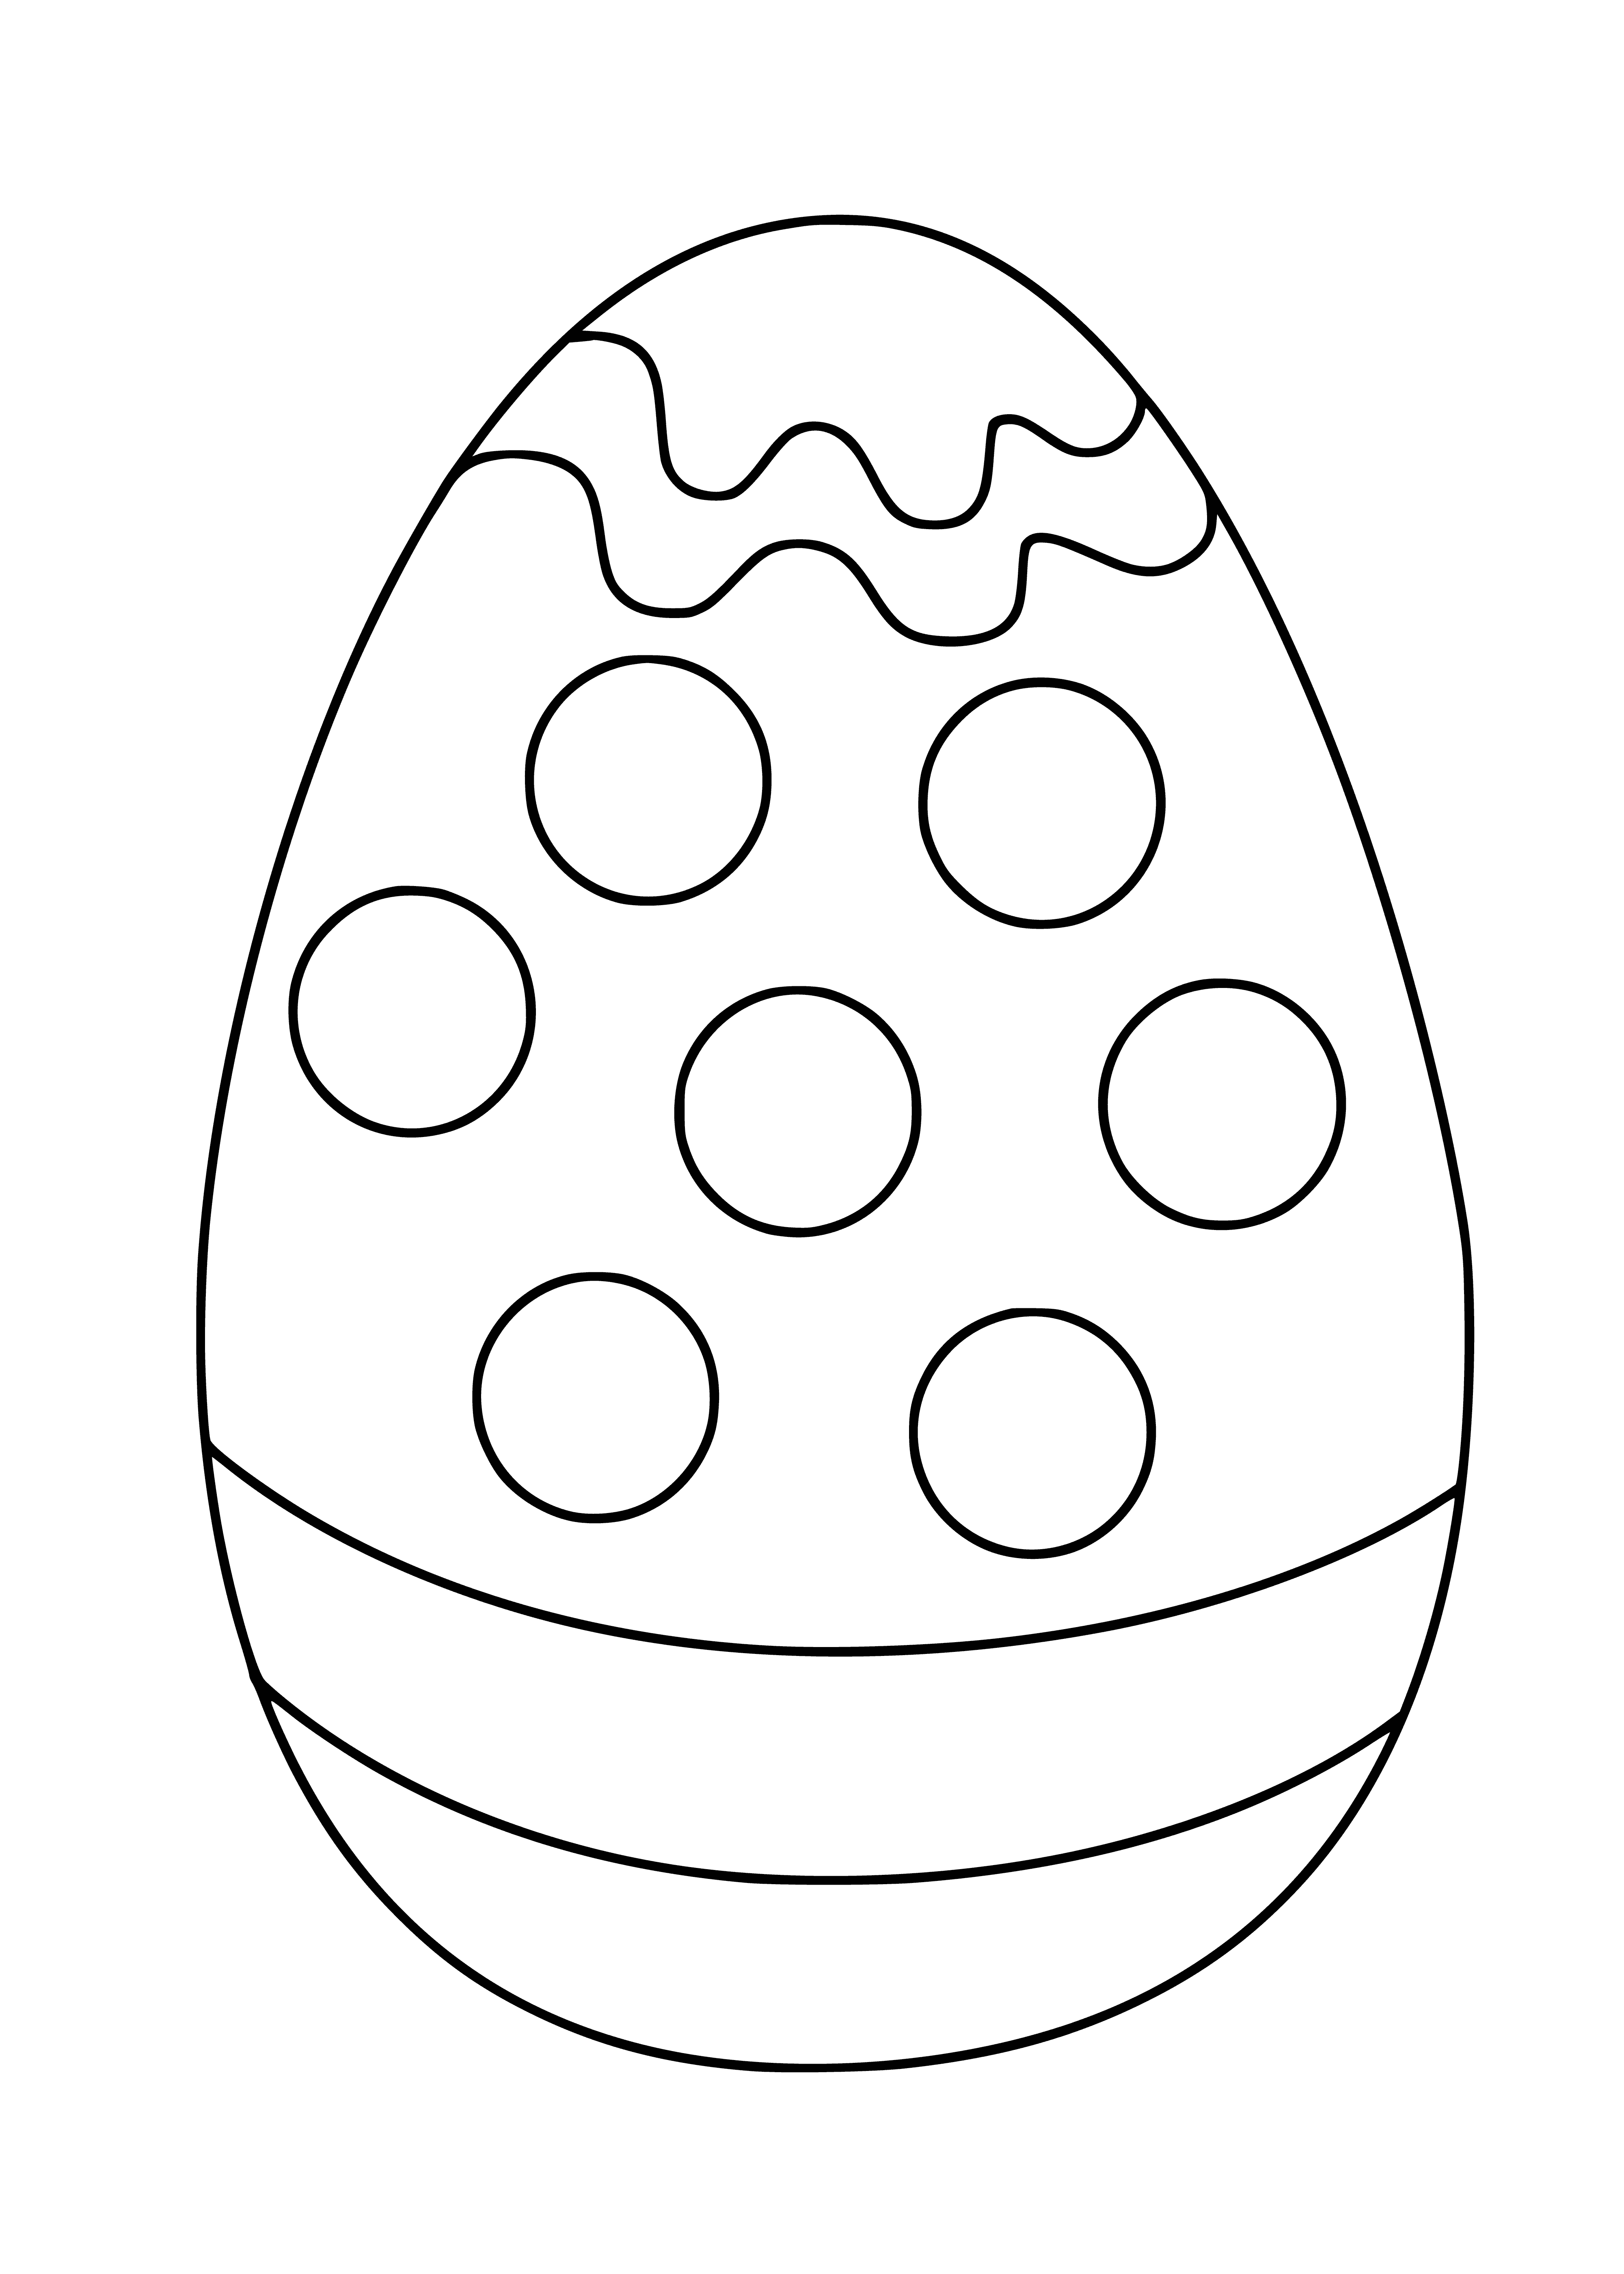 coloring page: Close-up of Easter egg - brown with white speckles, small brown bunny in center. #Easter #egg #bunny